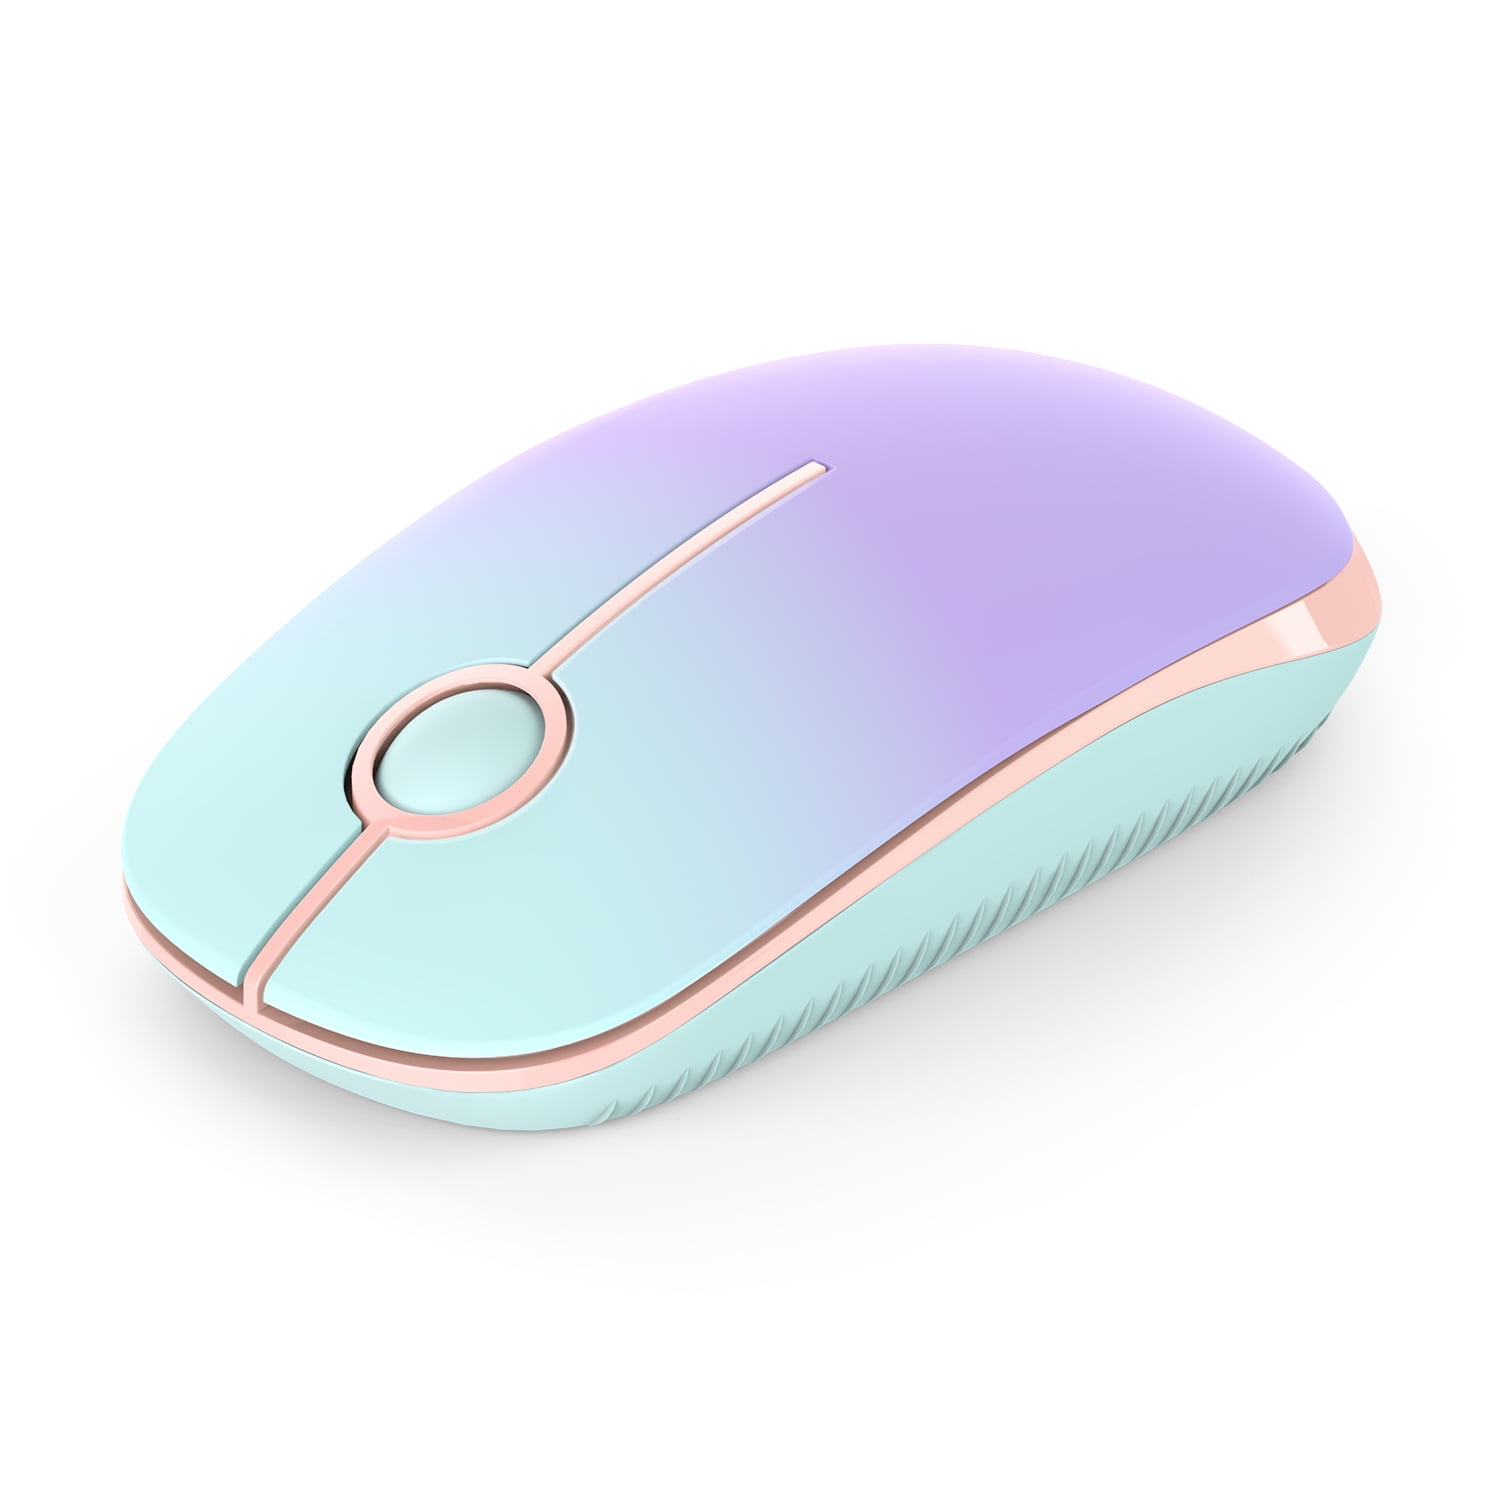 2.4G Slim Wireless Mouse with Nano Receiver, Less Noise, Portable Mobile  Optical Mice for Notebook, PC, Laptop, Computer, MacBook MS001 (Mint Green  to